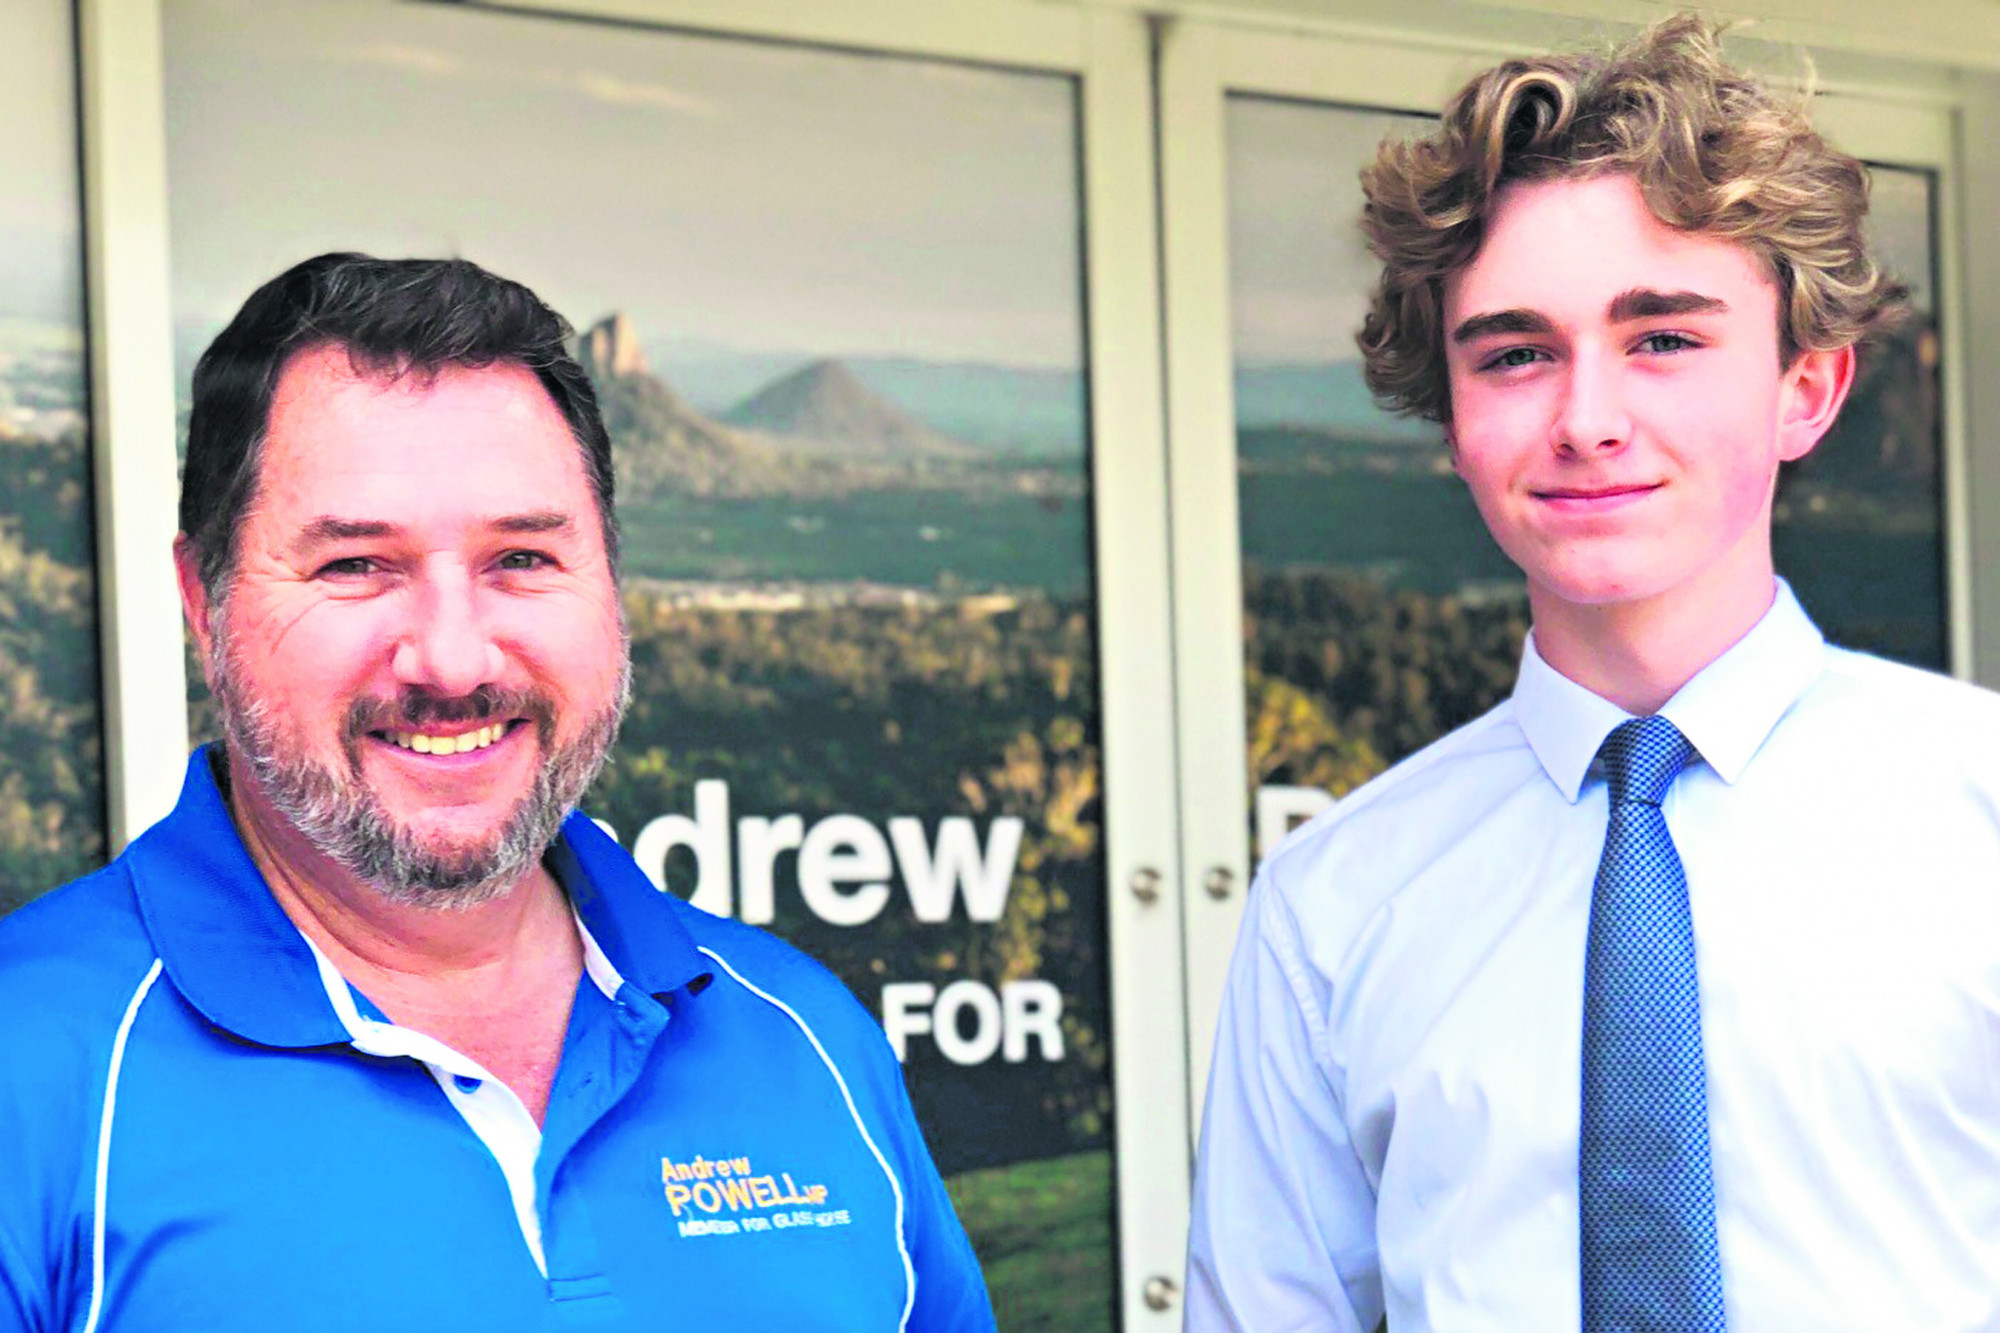 Member for Glass House Andrew Powell with Queensland Youth Parliament Member Connor Keogh